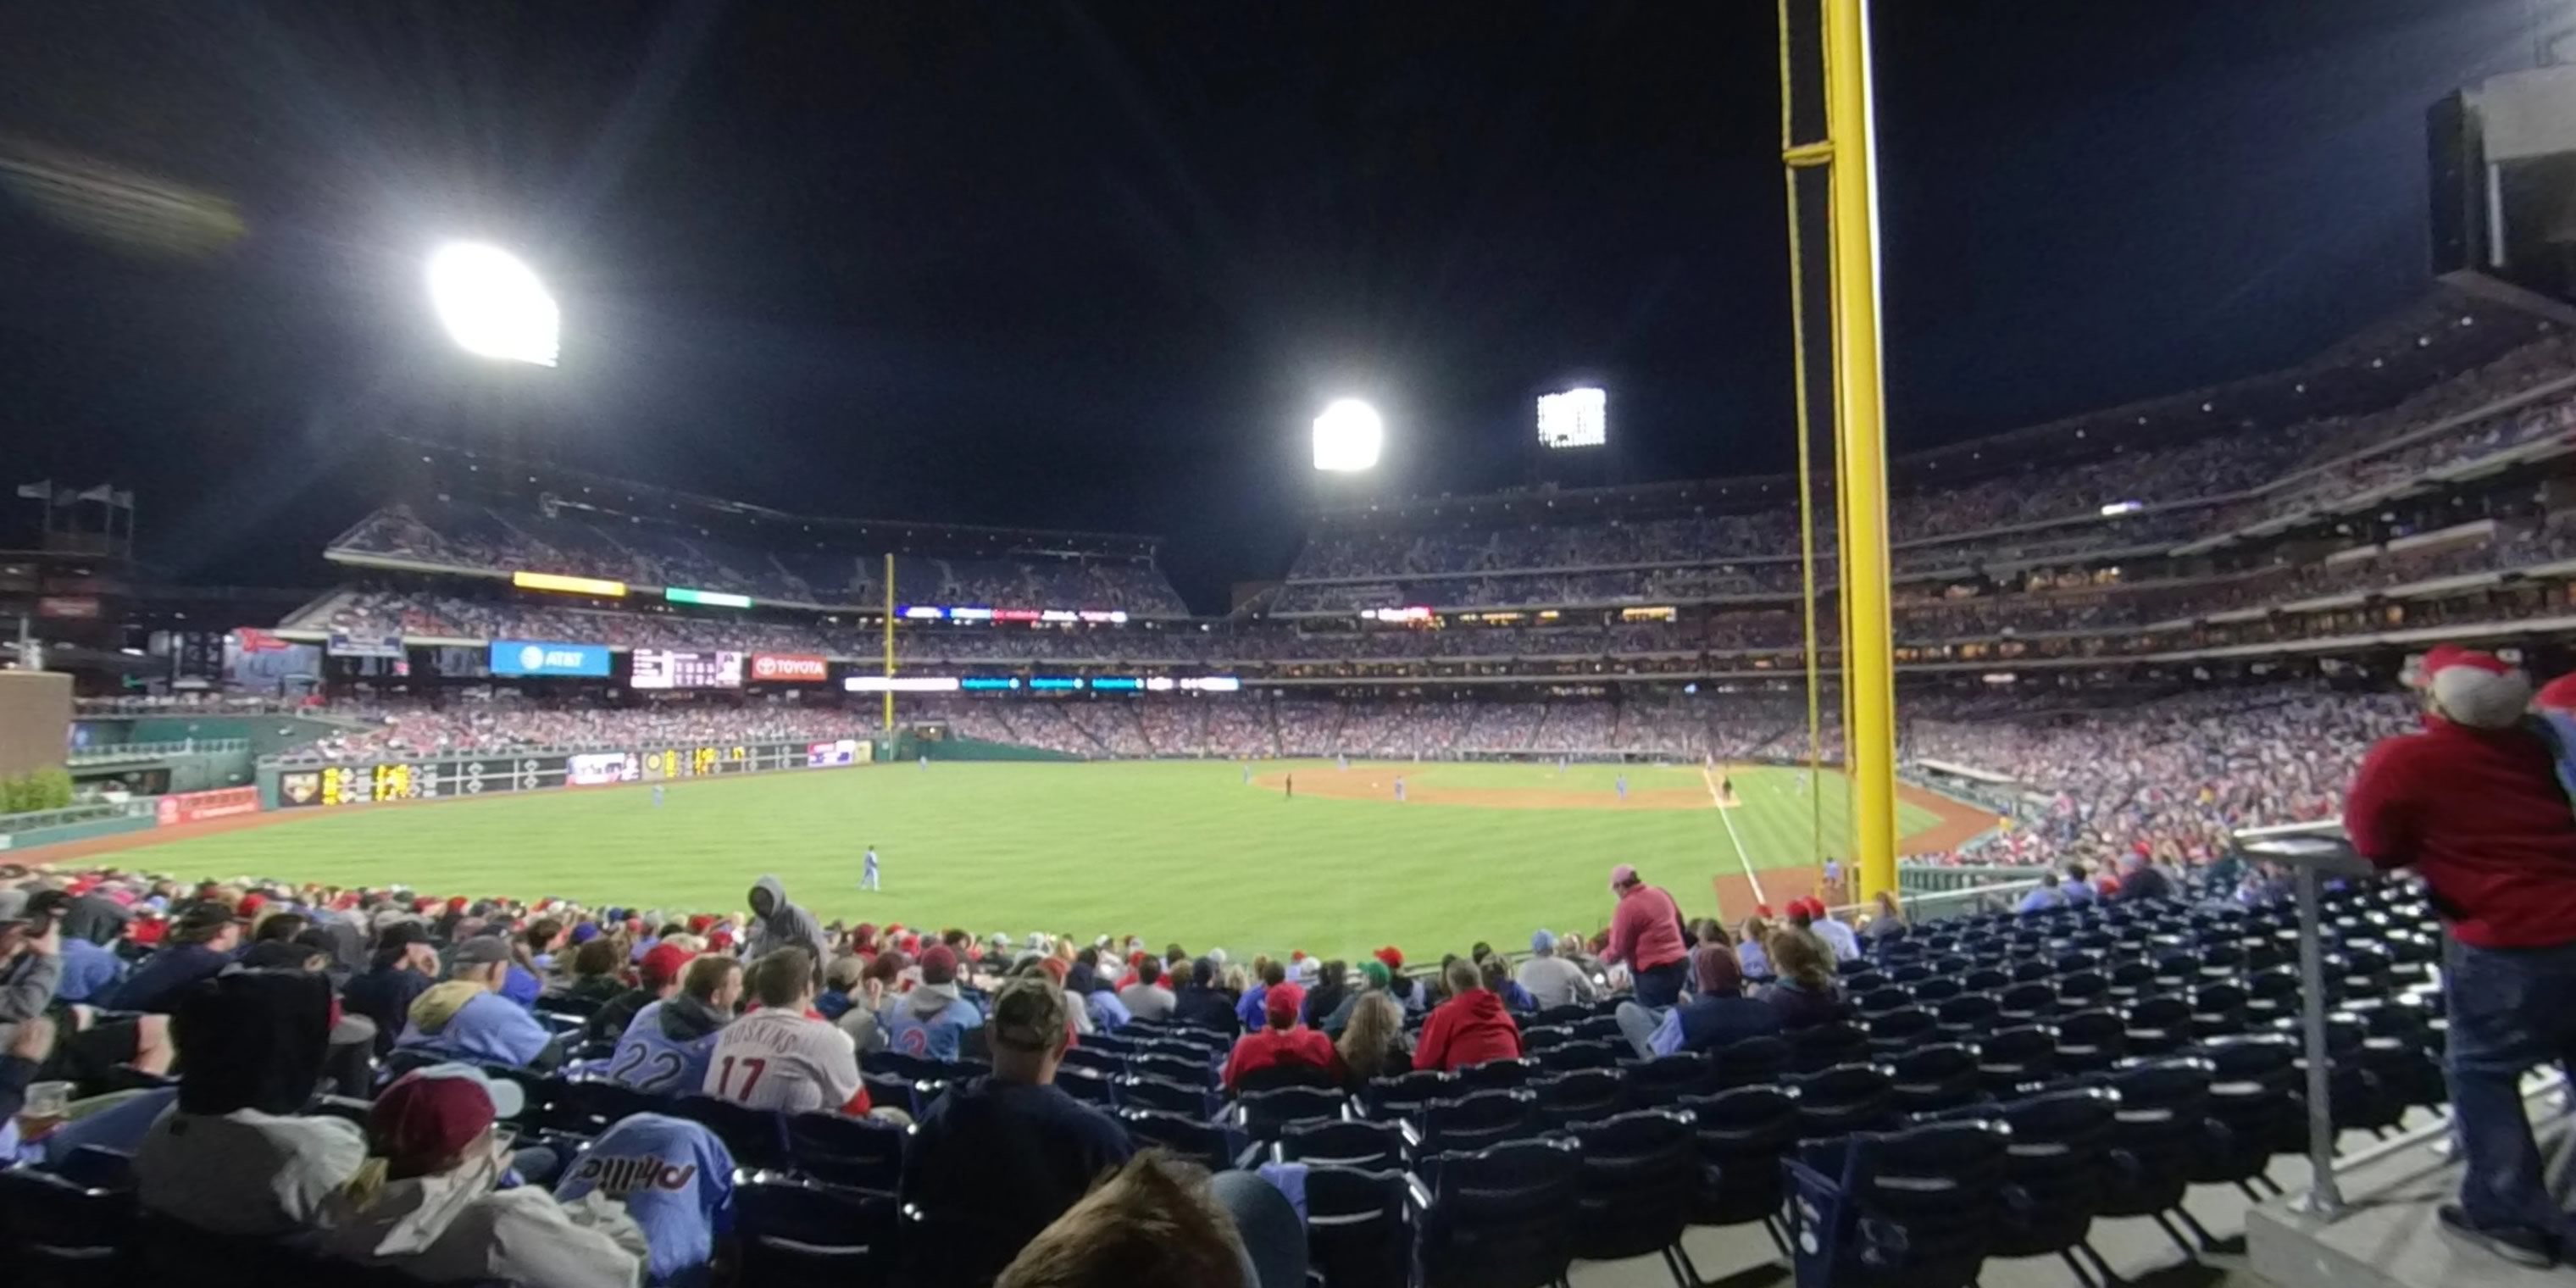 section 140 panoramic seat view  for baseball - citizens bank park